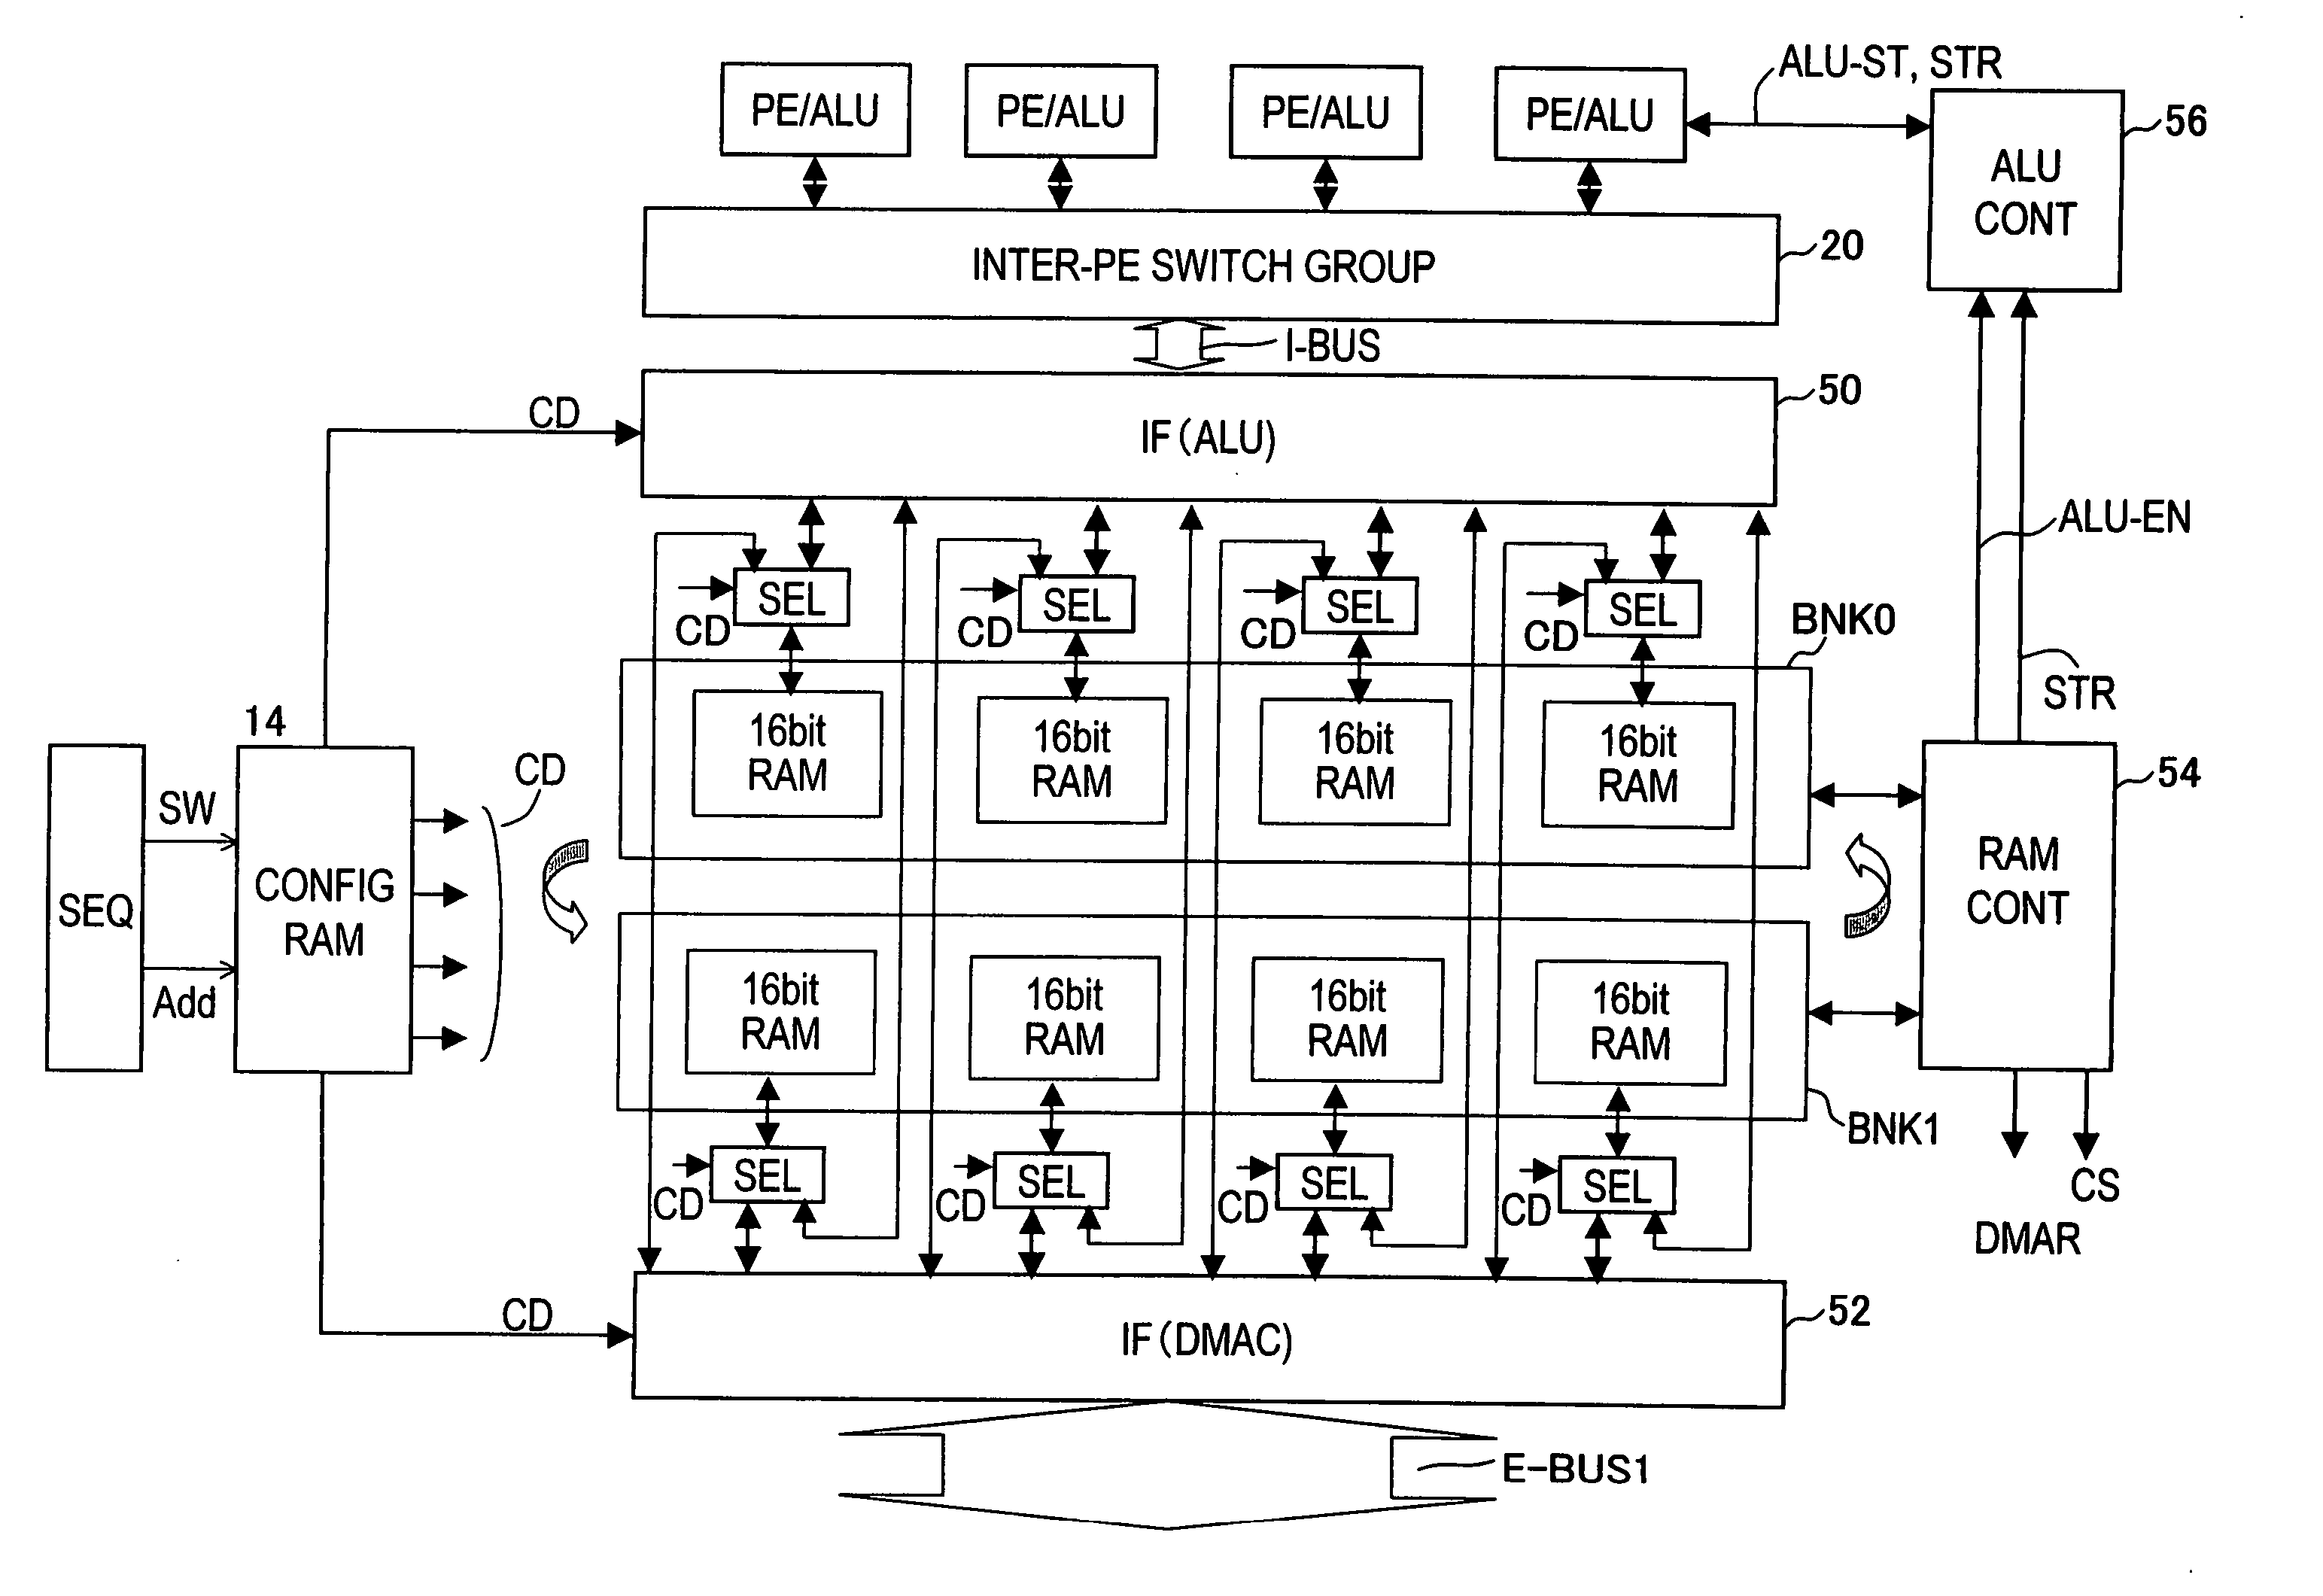 Reconfigurable integrated circuit device